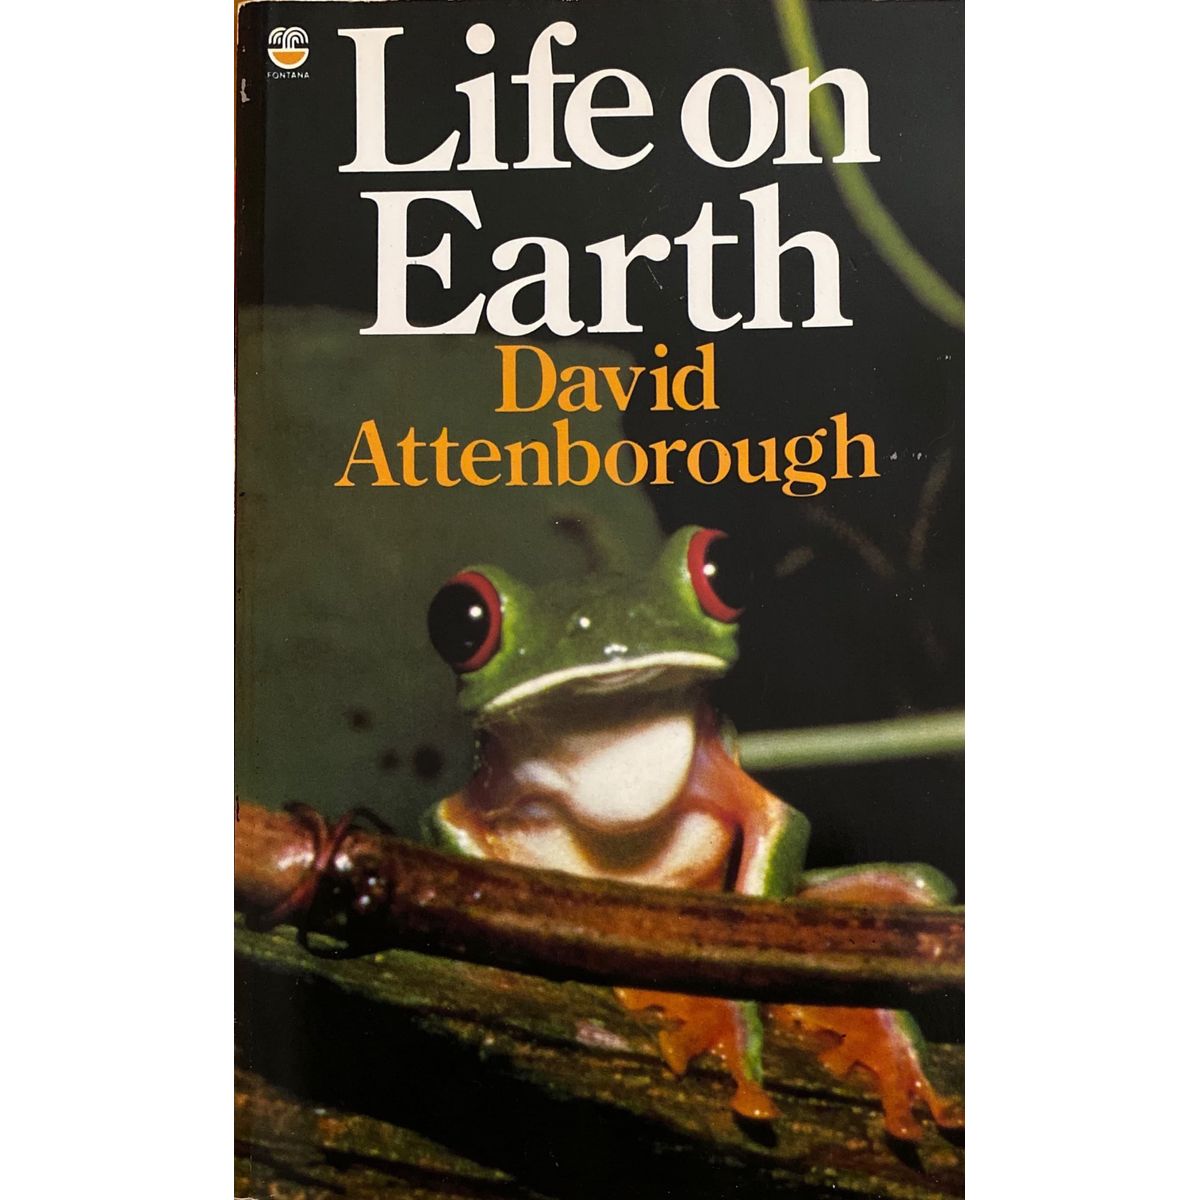 ISBN: 9780006361848 / 0006361846 - Life On Earth by David Attenborough [1989]